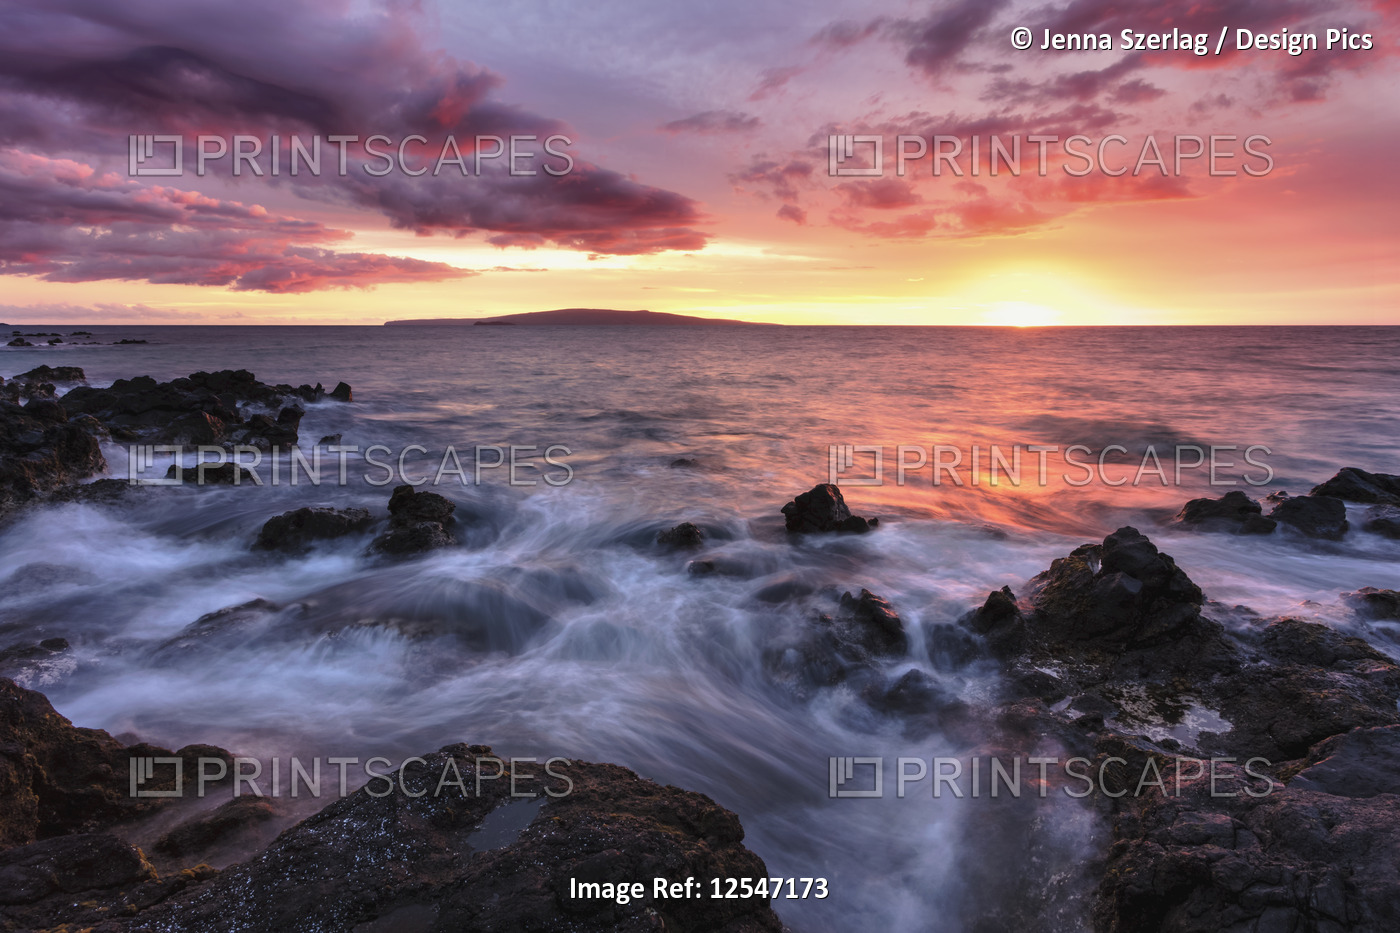 Soft Water Over Lava Rocks With A Red Sunset In Wailea, Maui, Hawaii USA